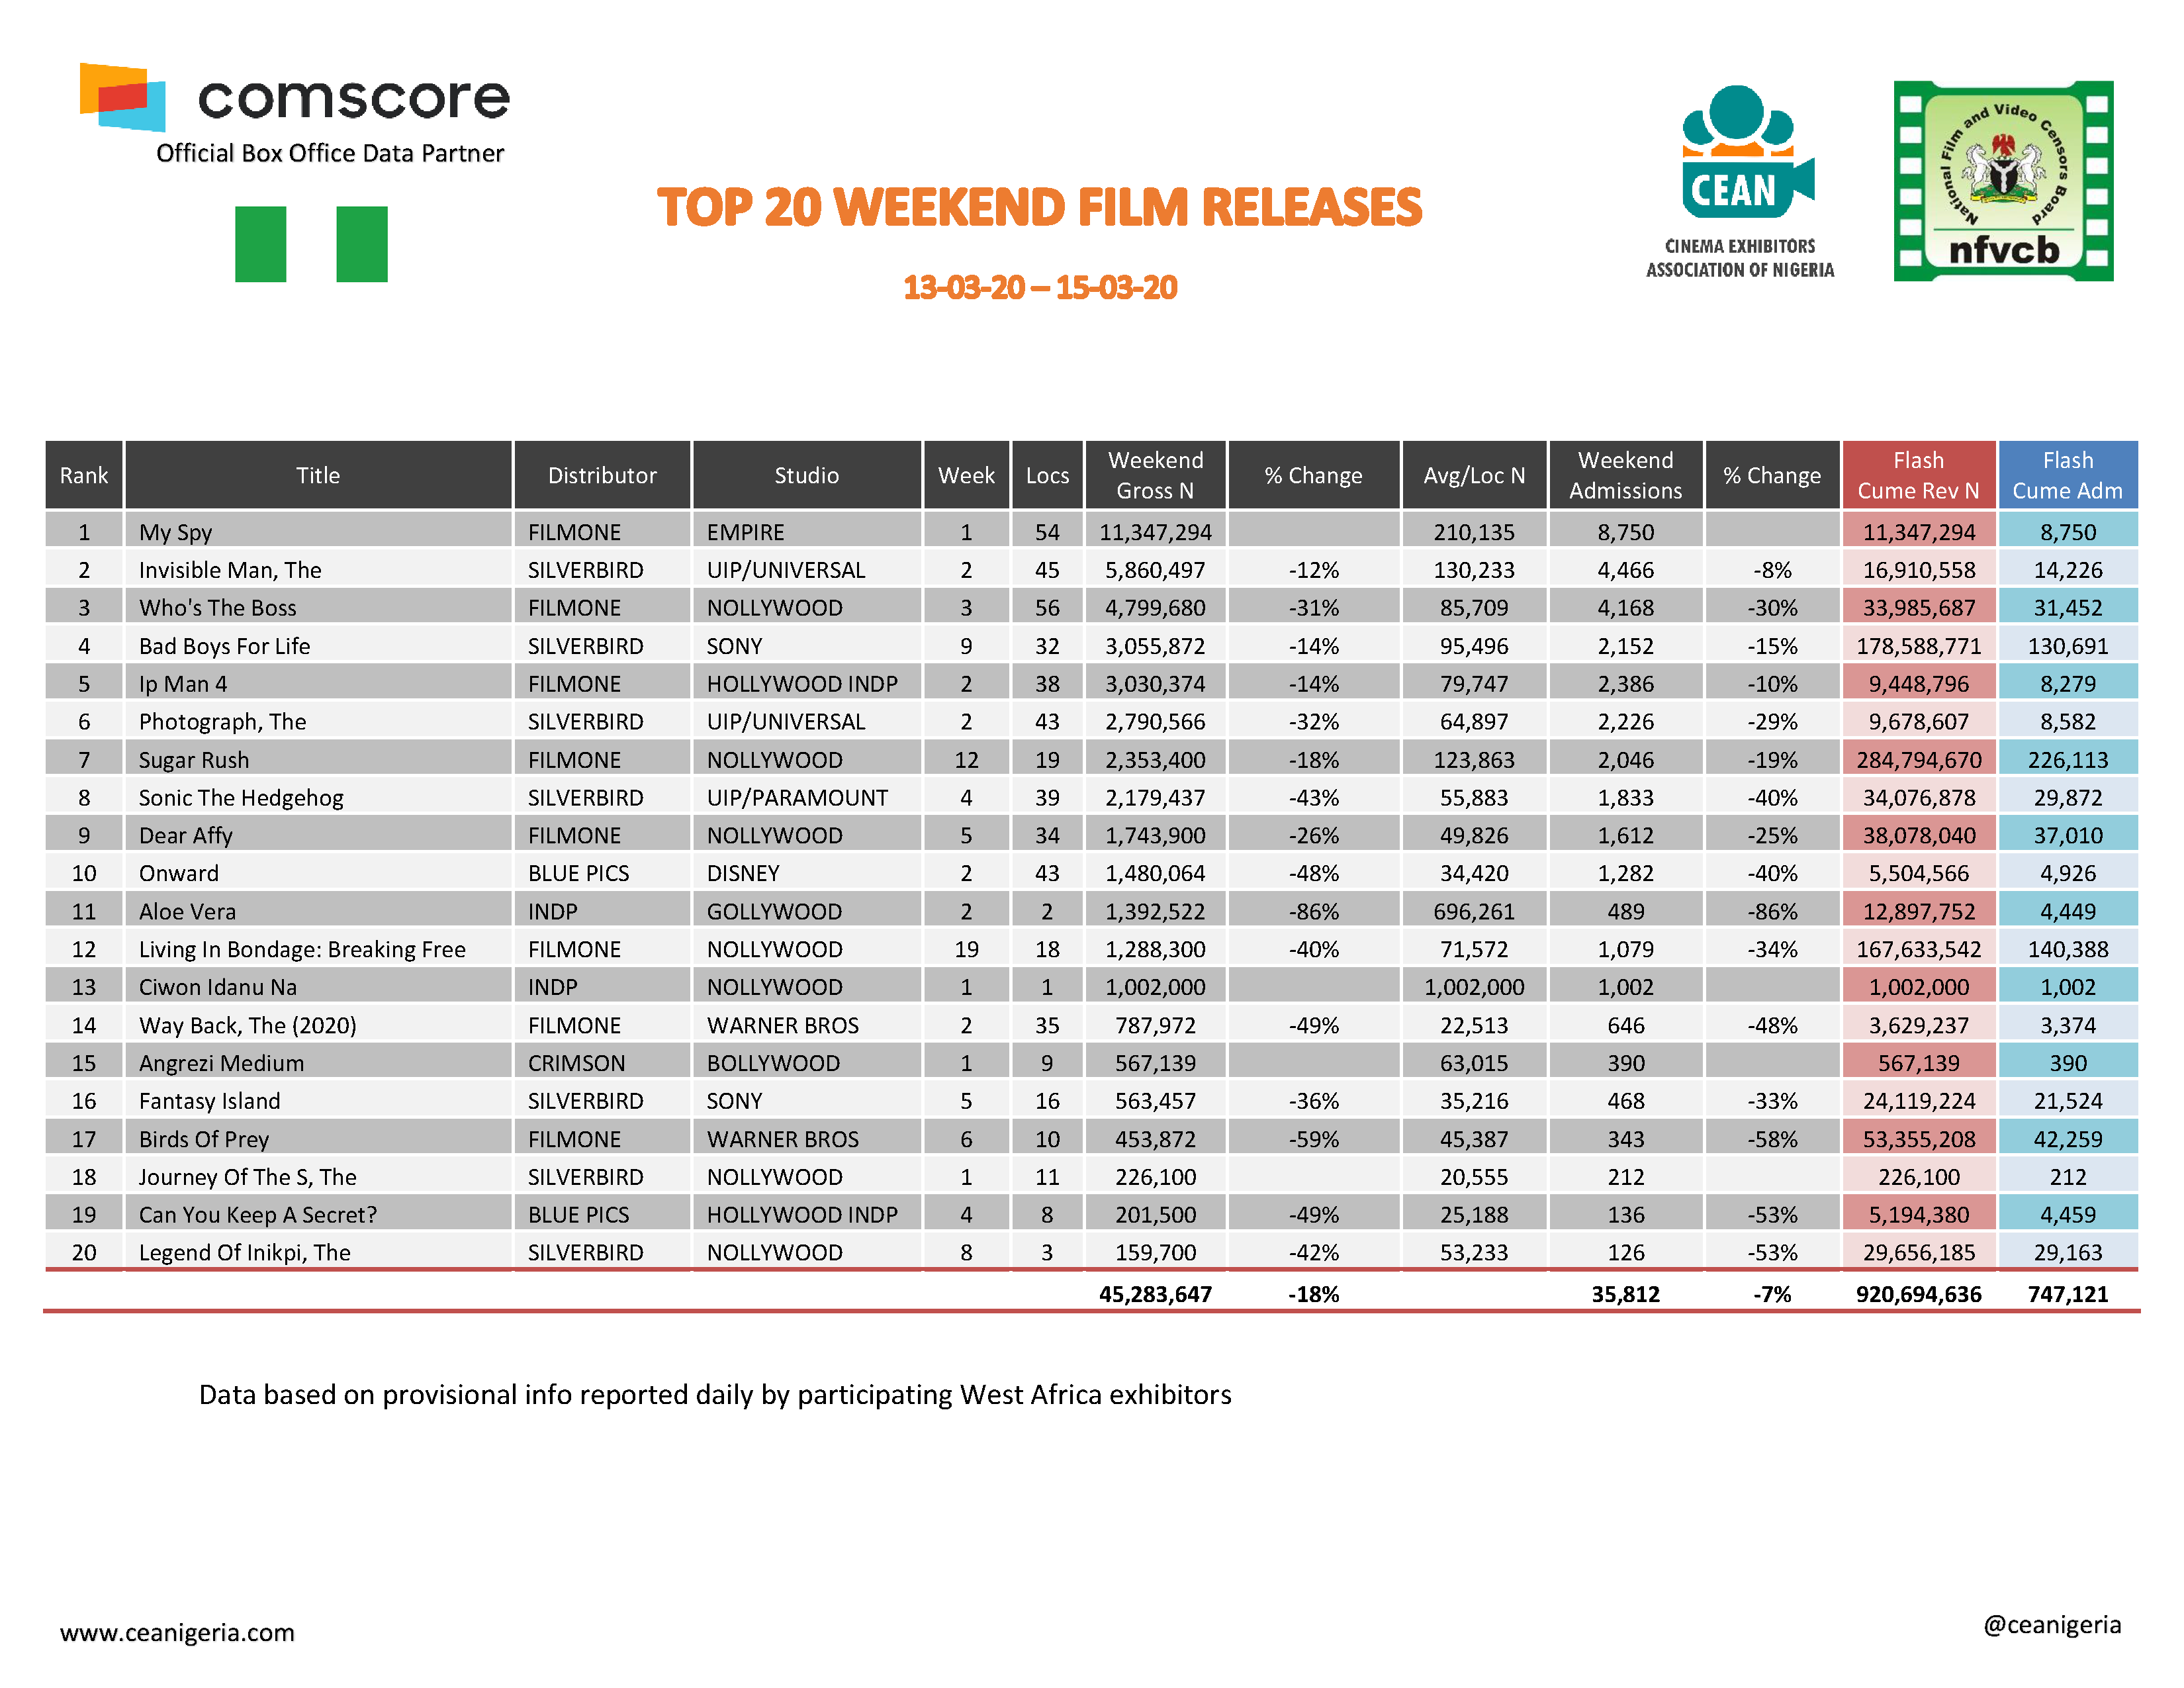 Top 20 films 13th 15th March 2020